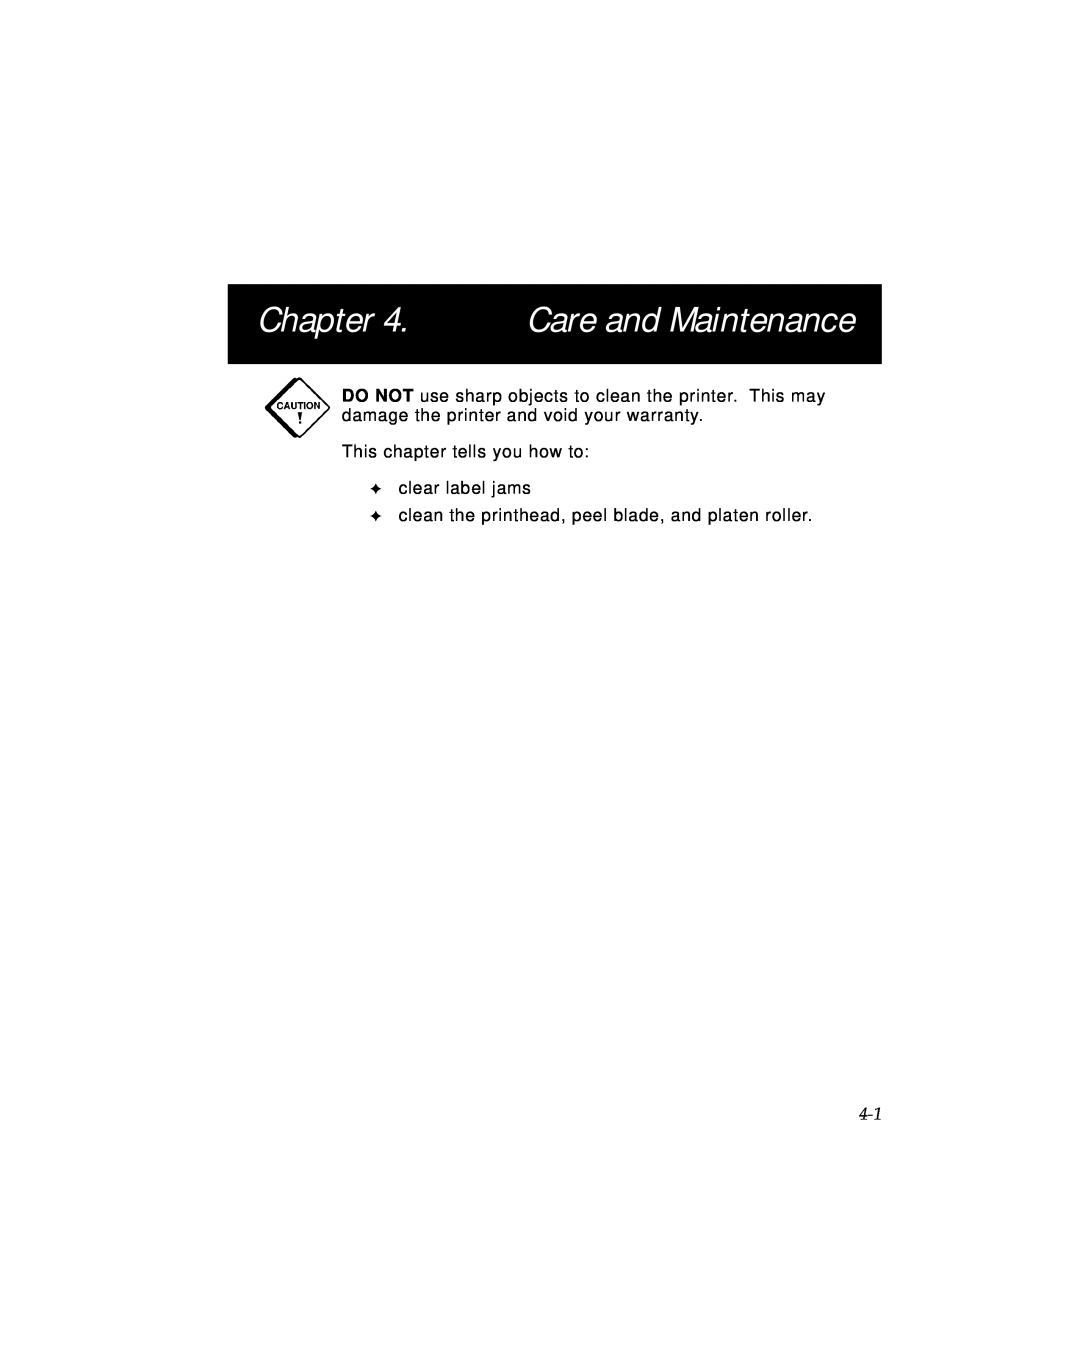 Monarch 9494 manual Care and Maintenance, This chapter tells you how to clear label jams 